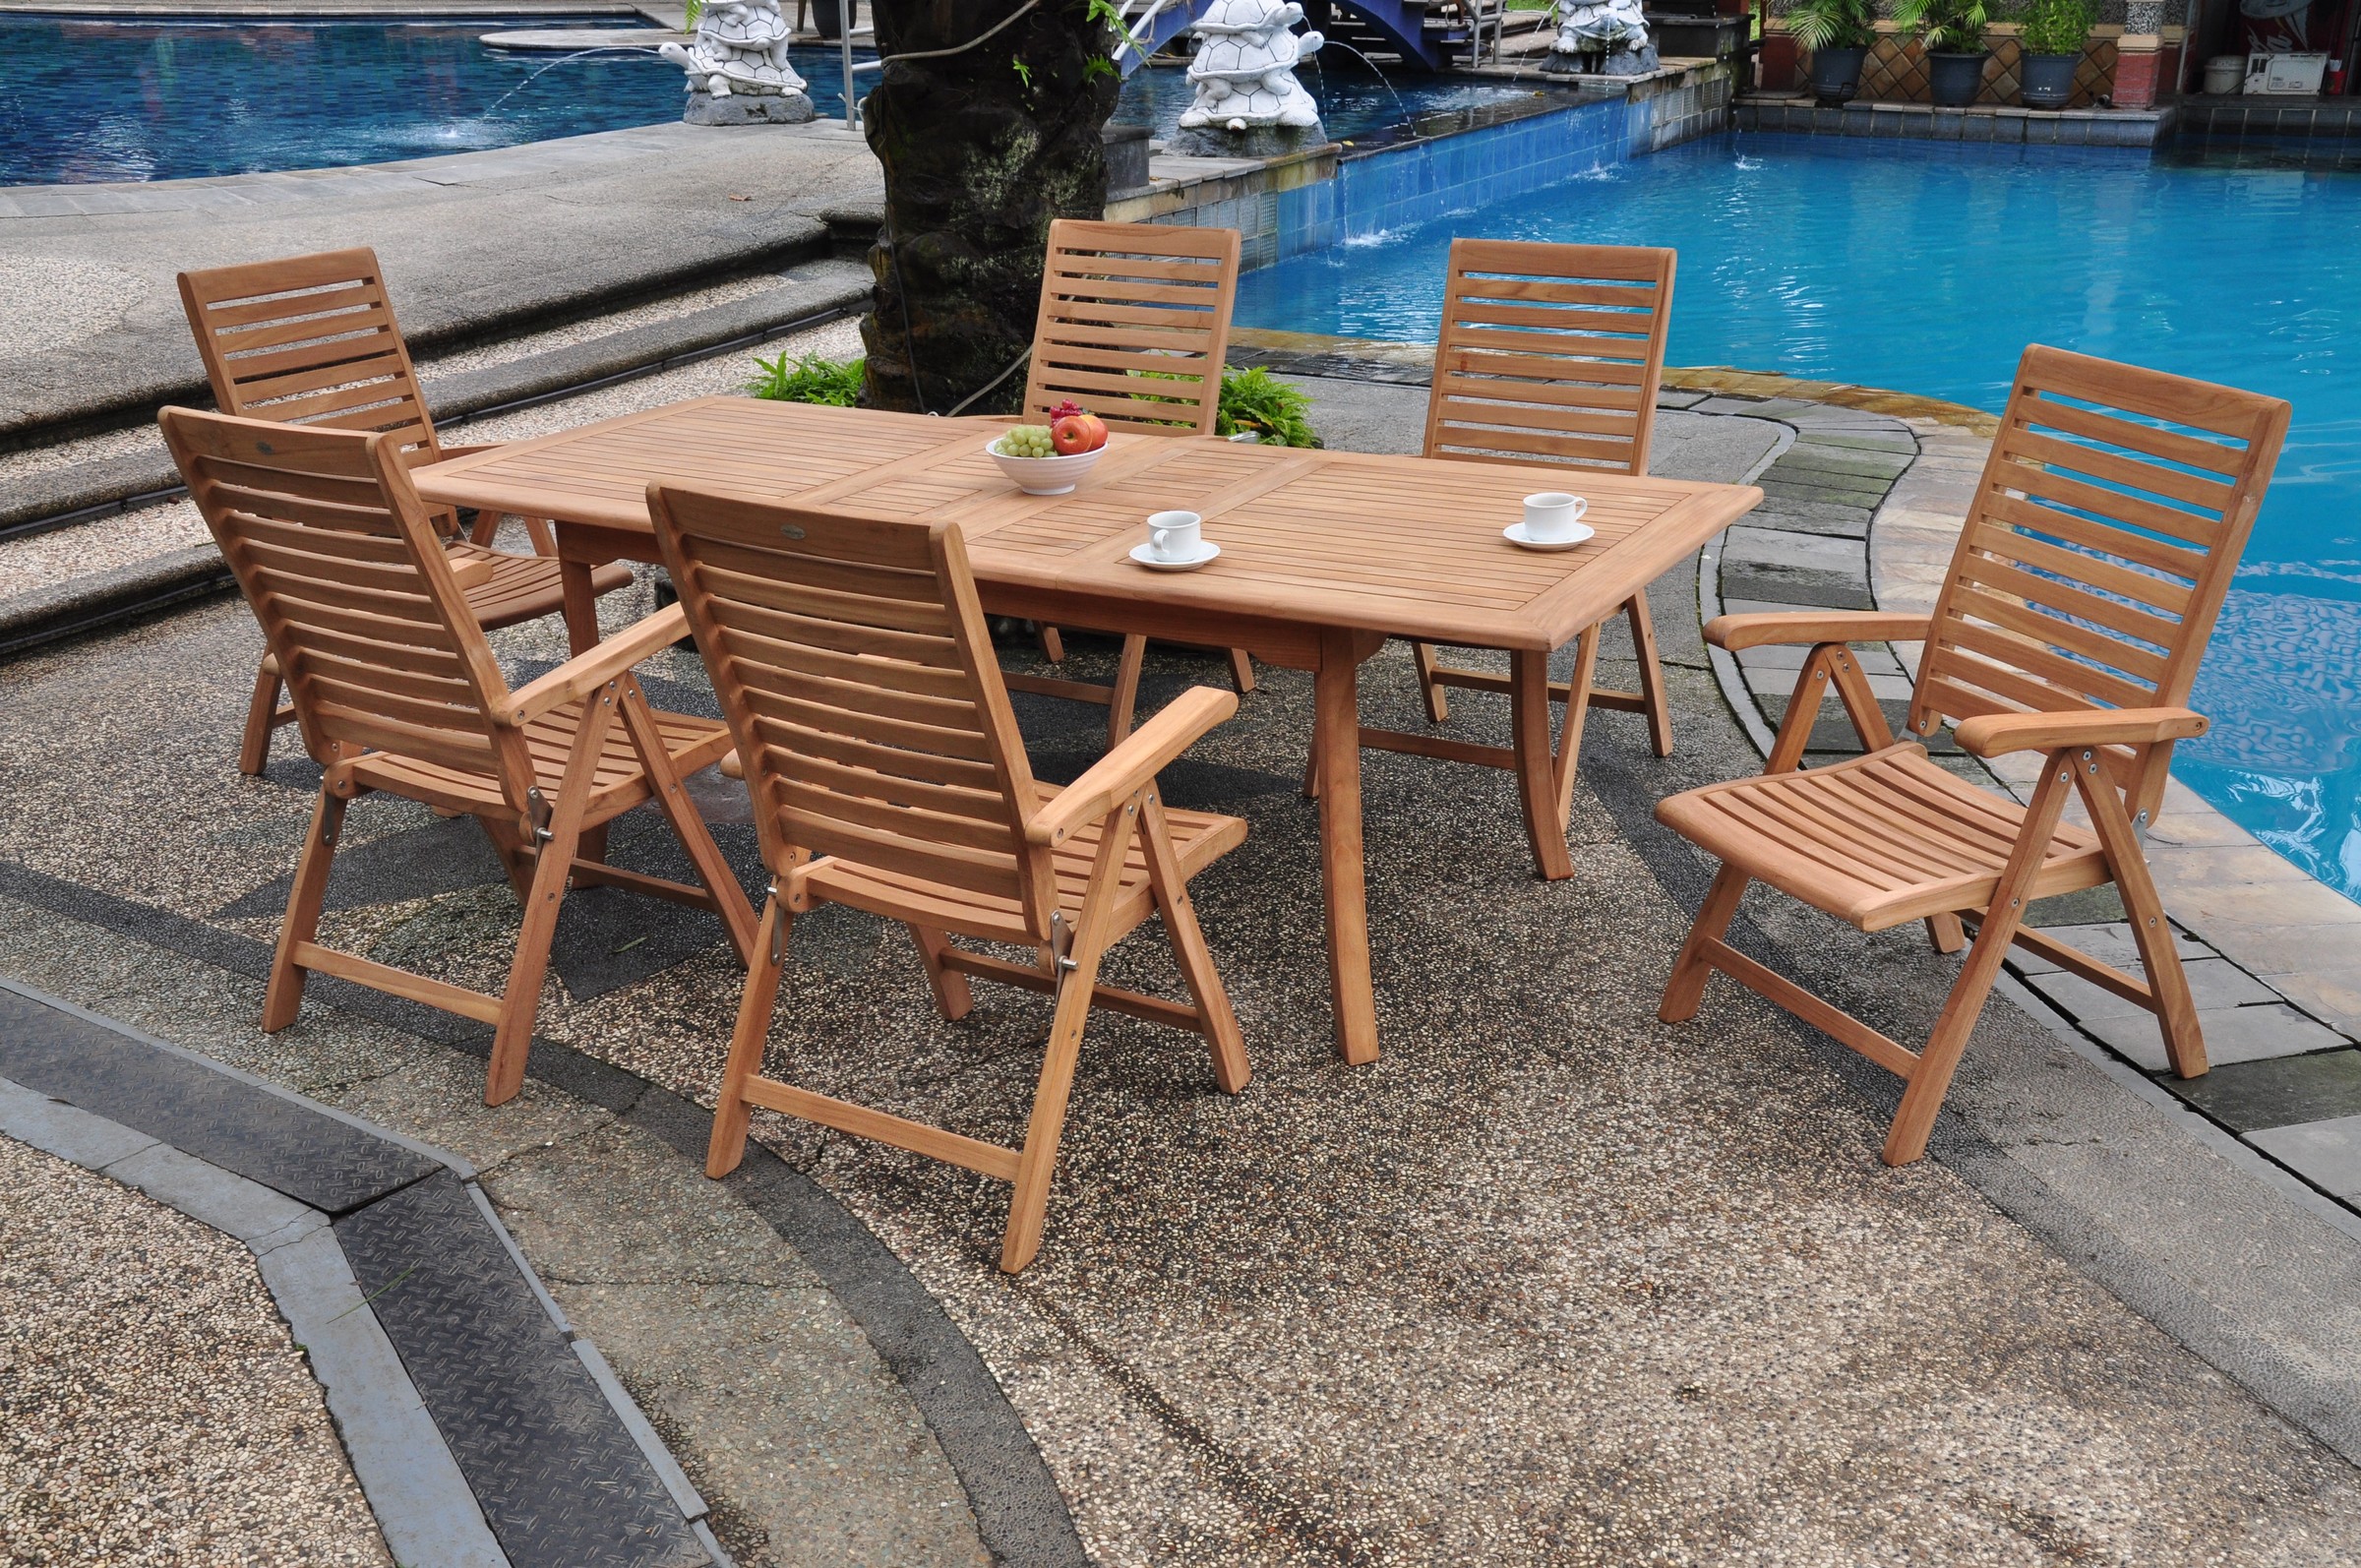 Teak Dining Set:6 Seater 7 Pc - 94" Rectangle Table And 6 Ashley Reclining Arm Chairs Outdoor Patio Grade-A Teak Wood WholesaleTeak #WMDSASa - image 1 of 4